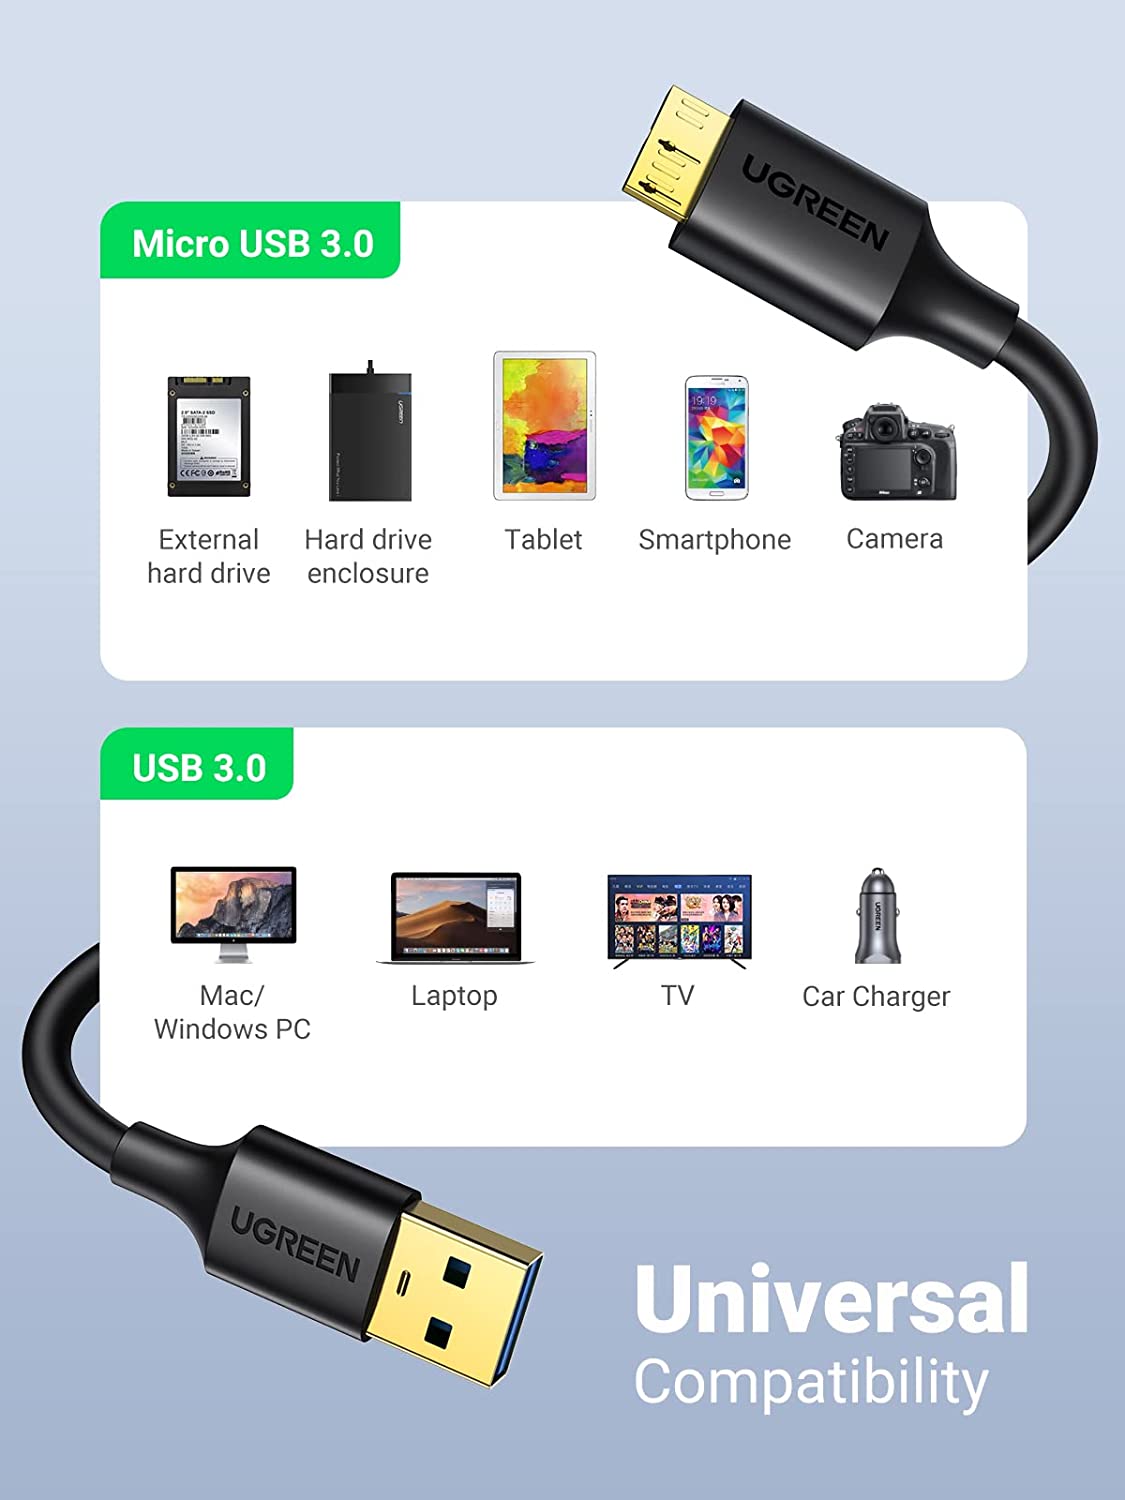 Ugreen Gold Plated USB 3.0 A Male to Micro B Male Adapter Cable, Supper Speed Data Sync Charger Charging Cable Cord, for Samsung Galaxy S5 Note 3 | Galaxy Note Pro 12.2 /Tab Pro 12.2 | Nokia Lumia 2520 Tablet etc 3ft/1m - 10841 - Hatke